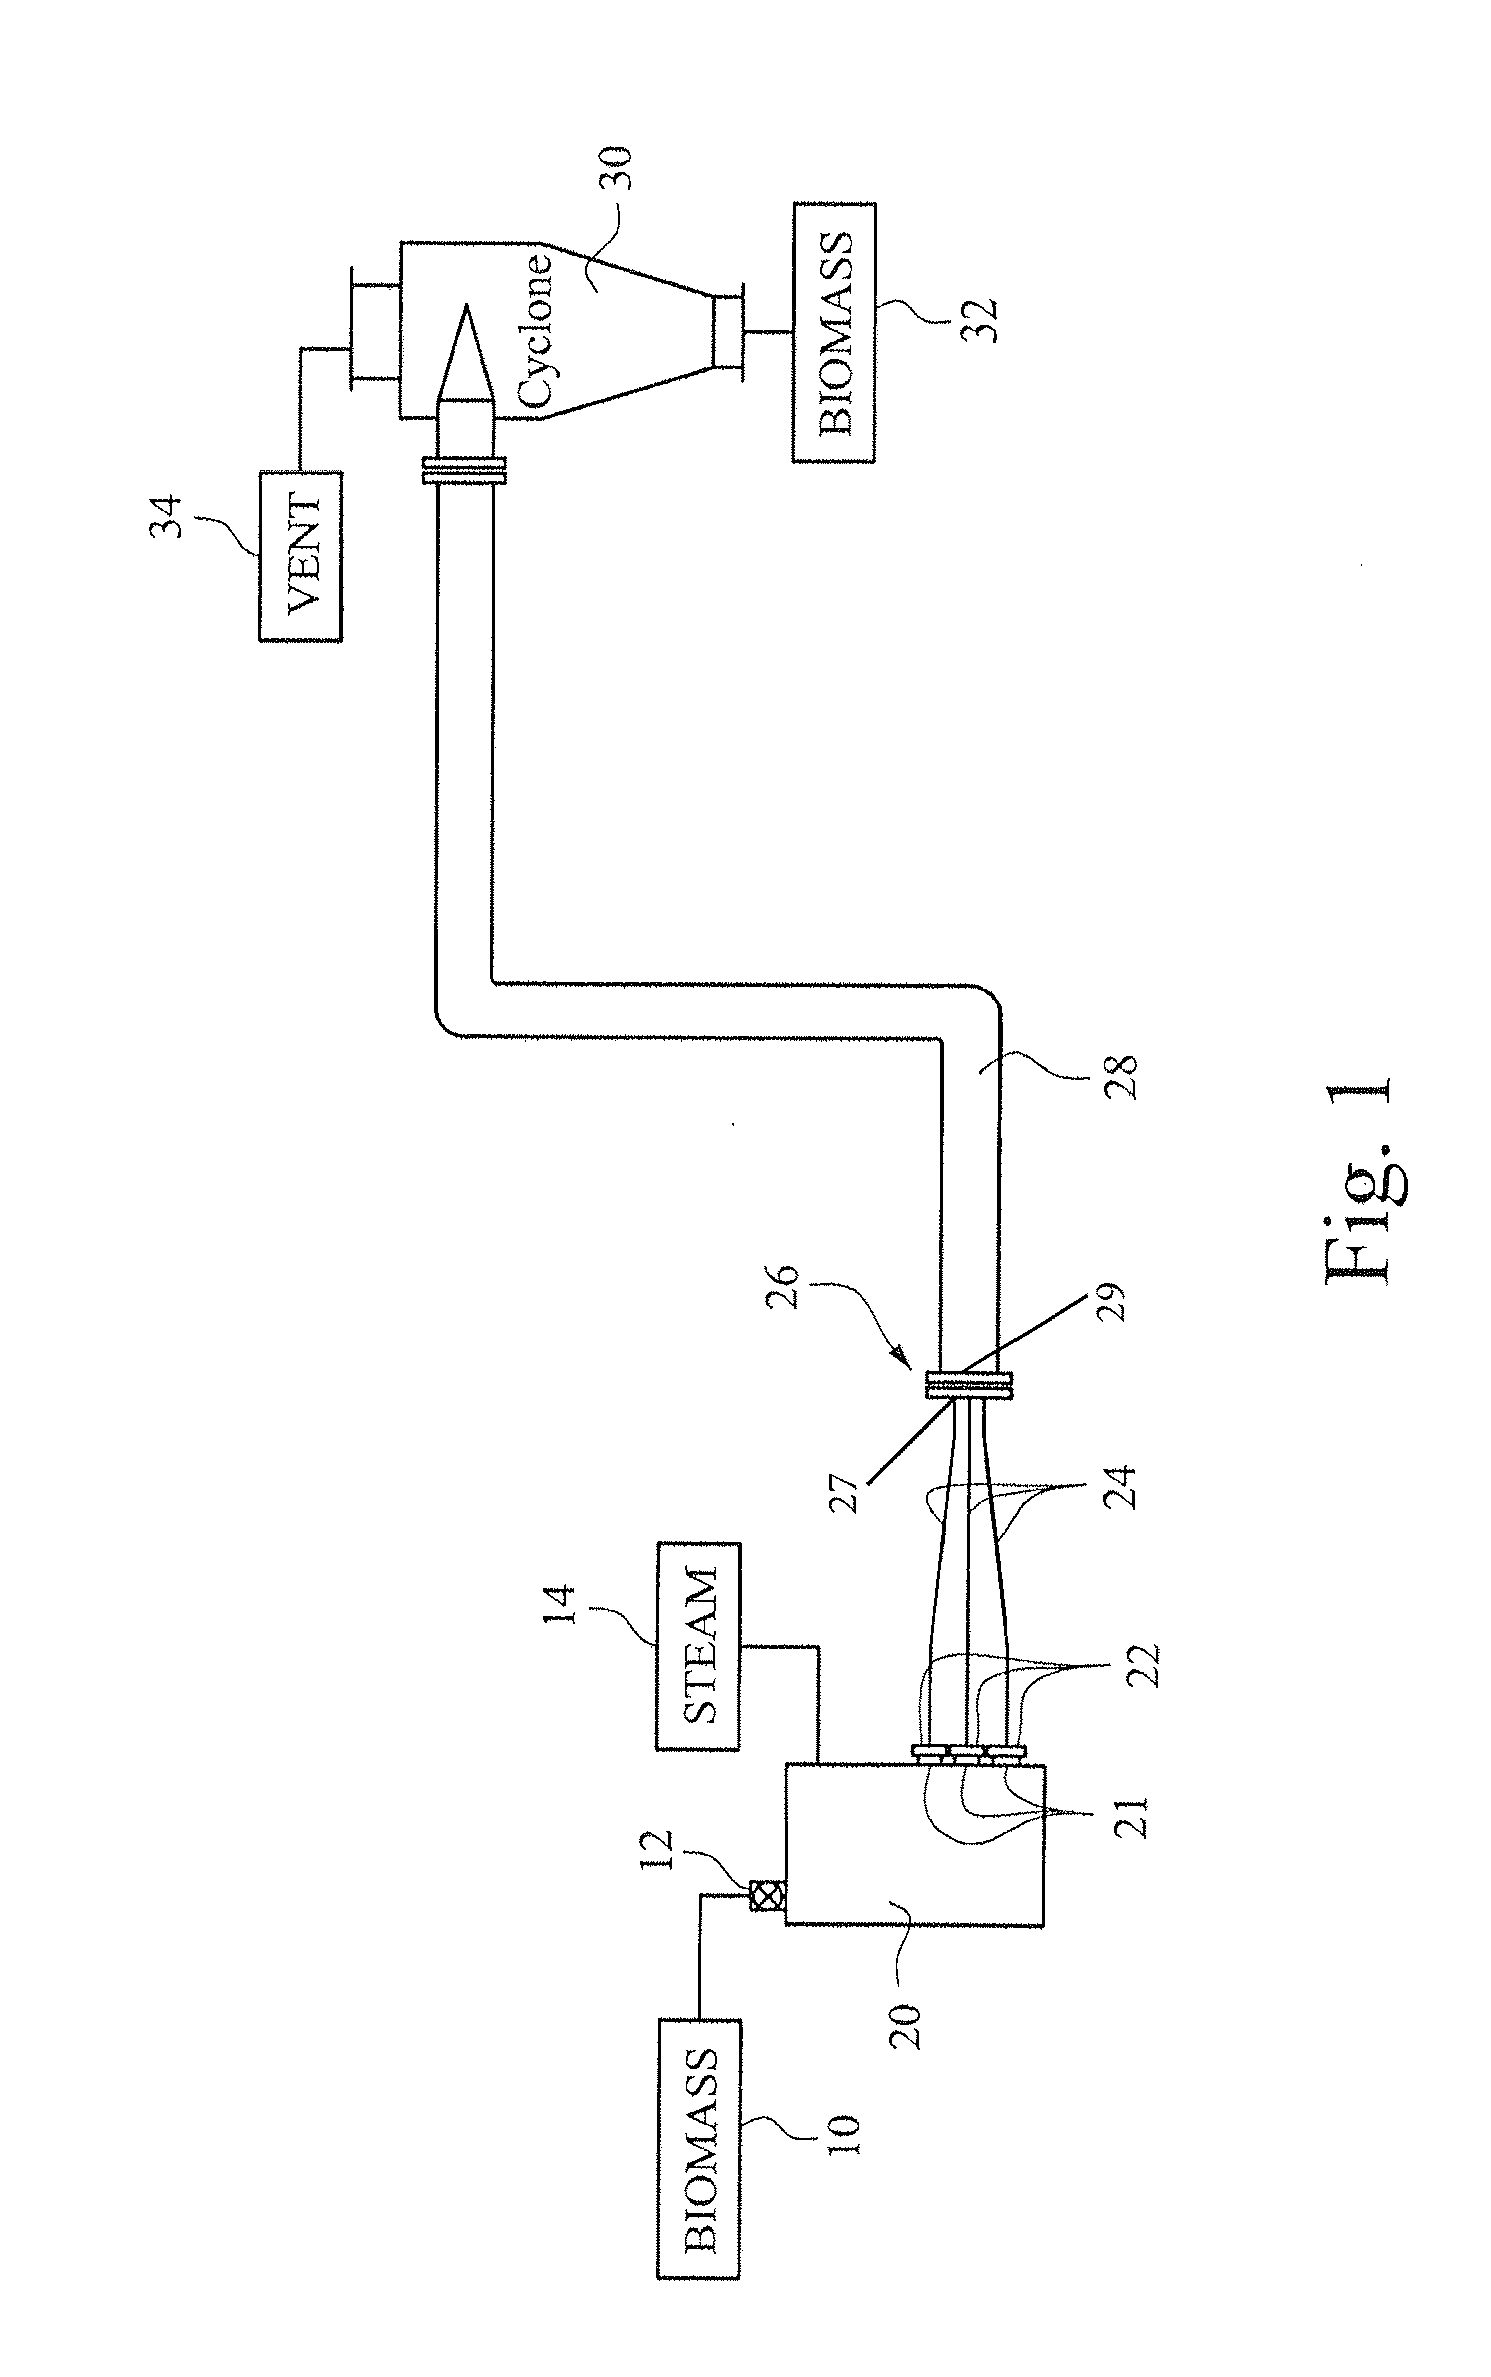 Piping system from reactor to separator and method to control process flow